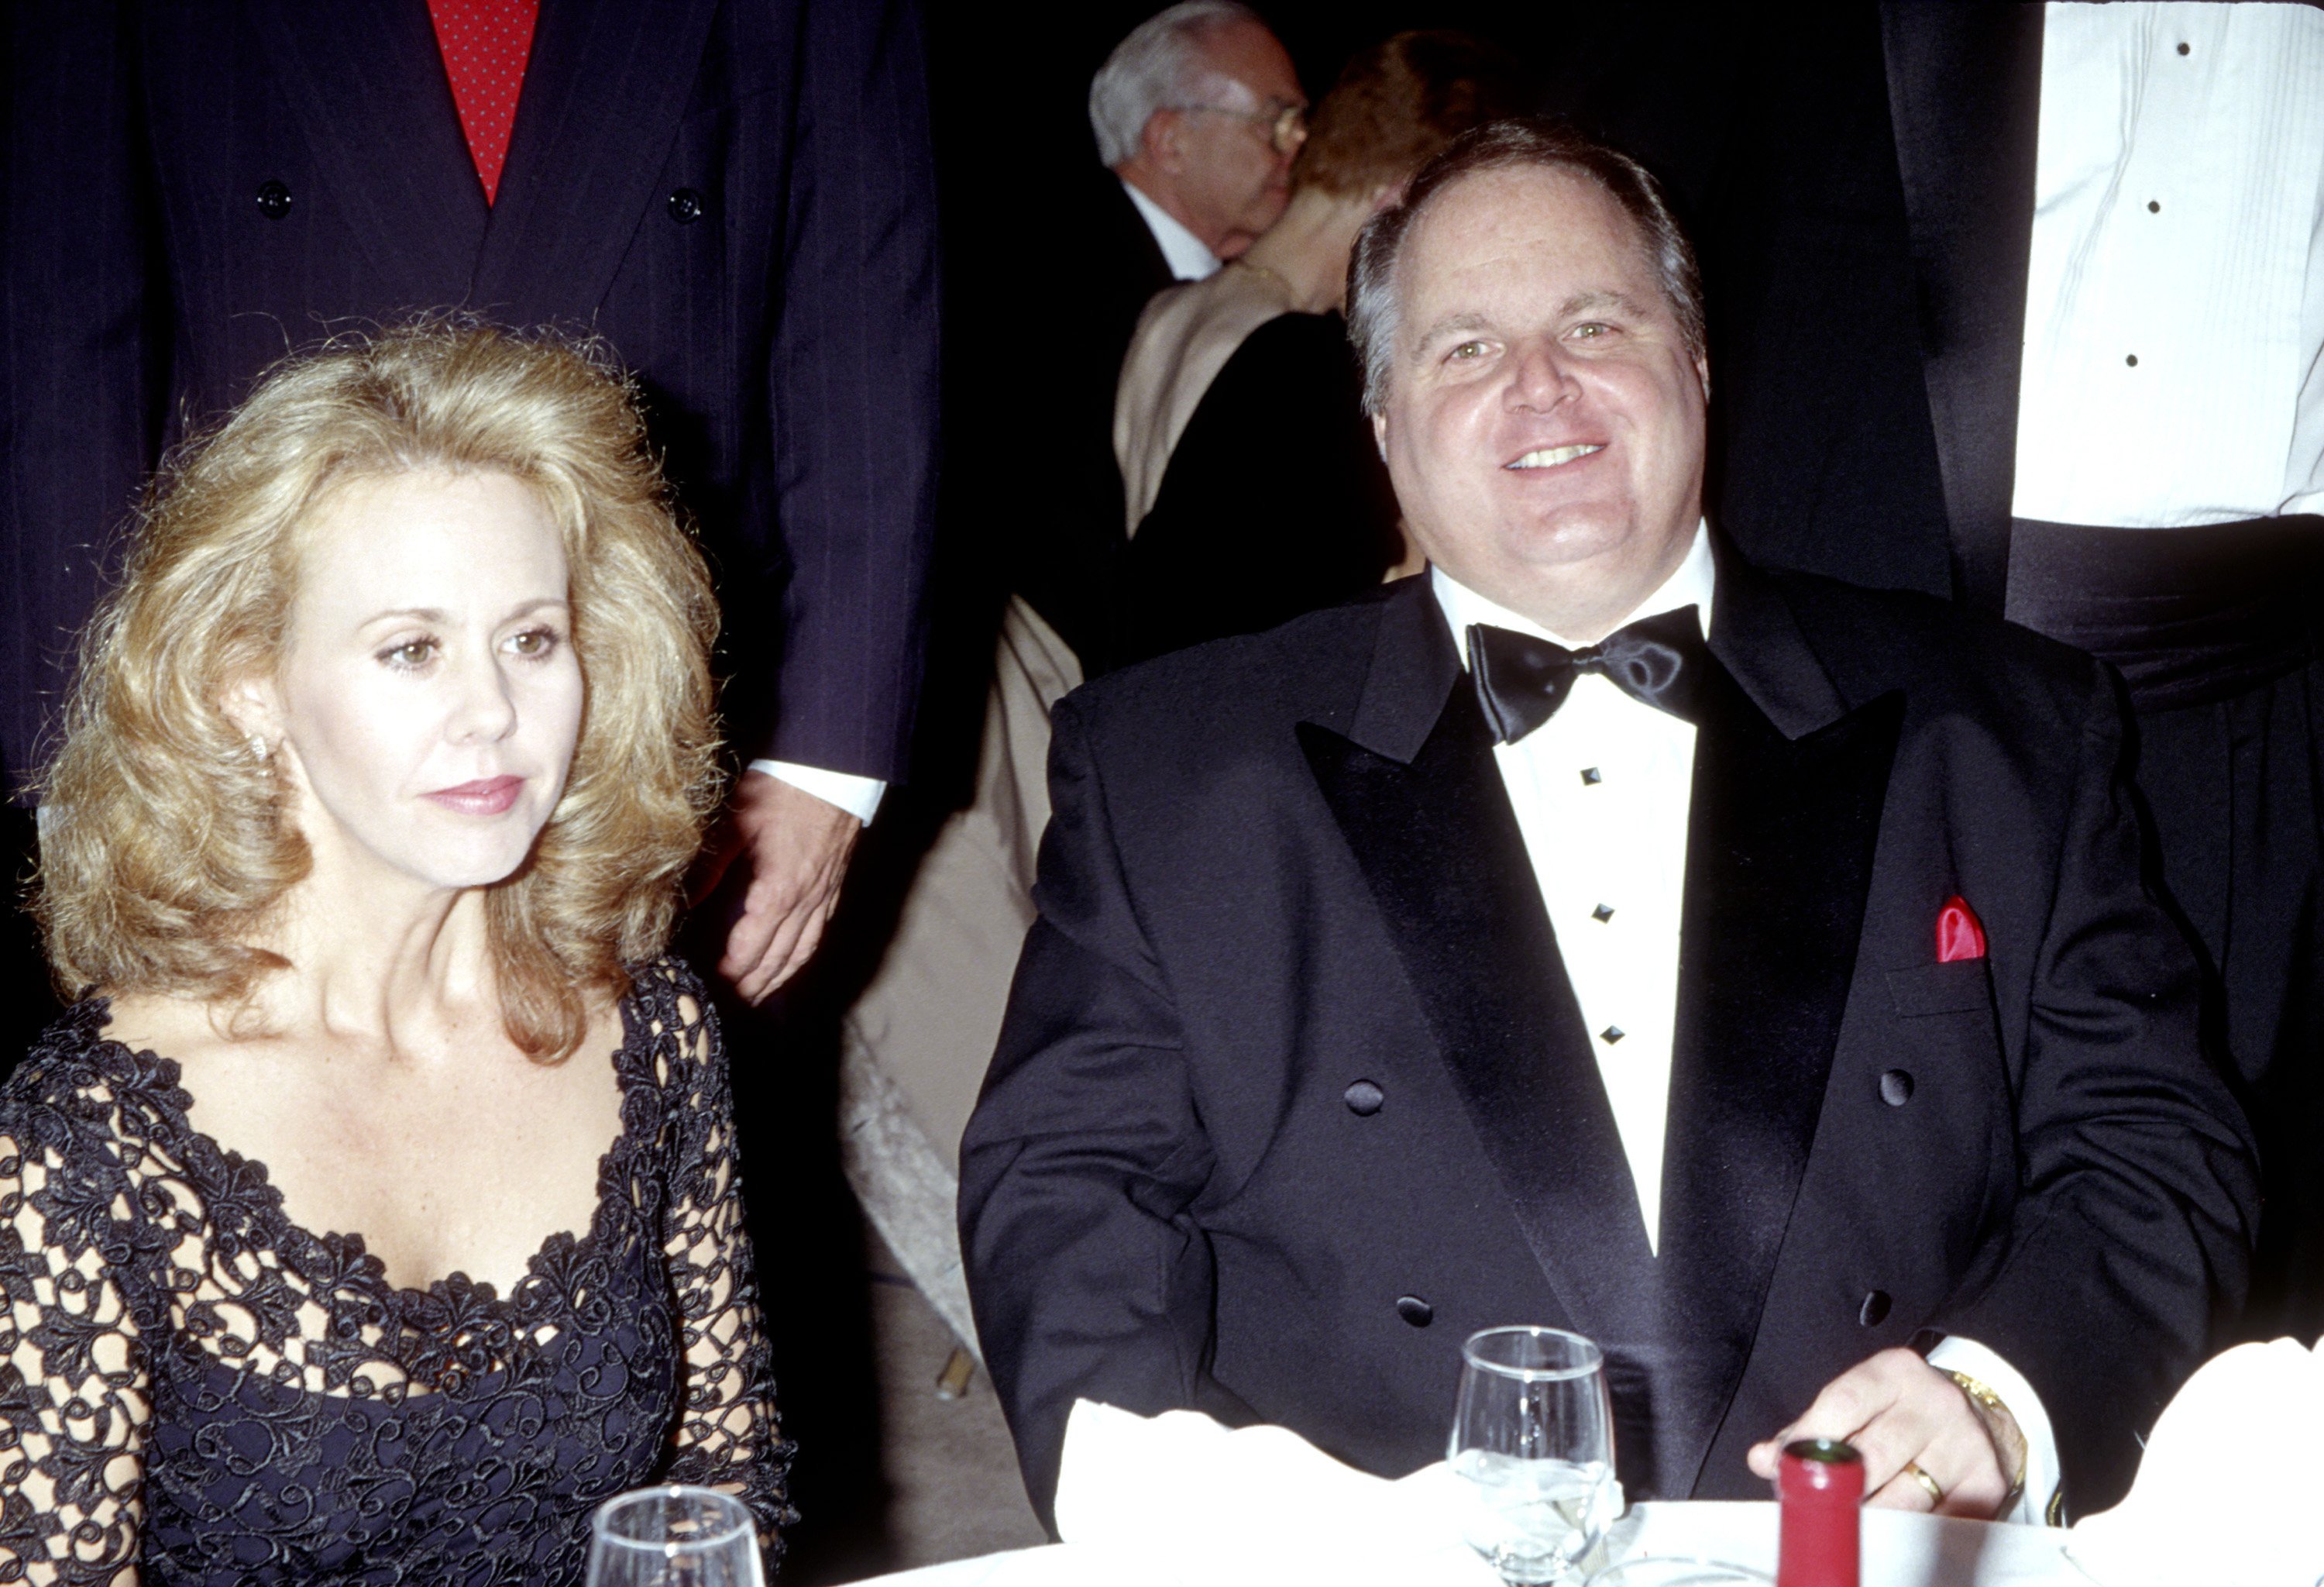 Rush Limbaugh & Wife during Center For Study of Popular Culture Dinner In Honor of Charlton Heston at Century Plaza Hotel in Century City, CA, United States. | Source Getty Images